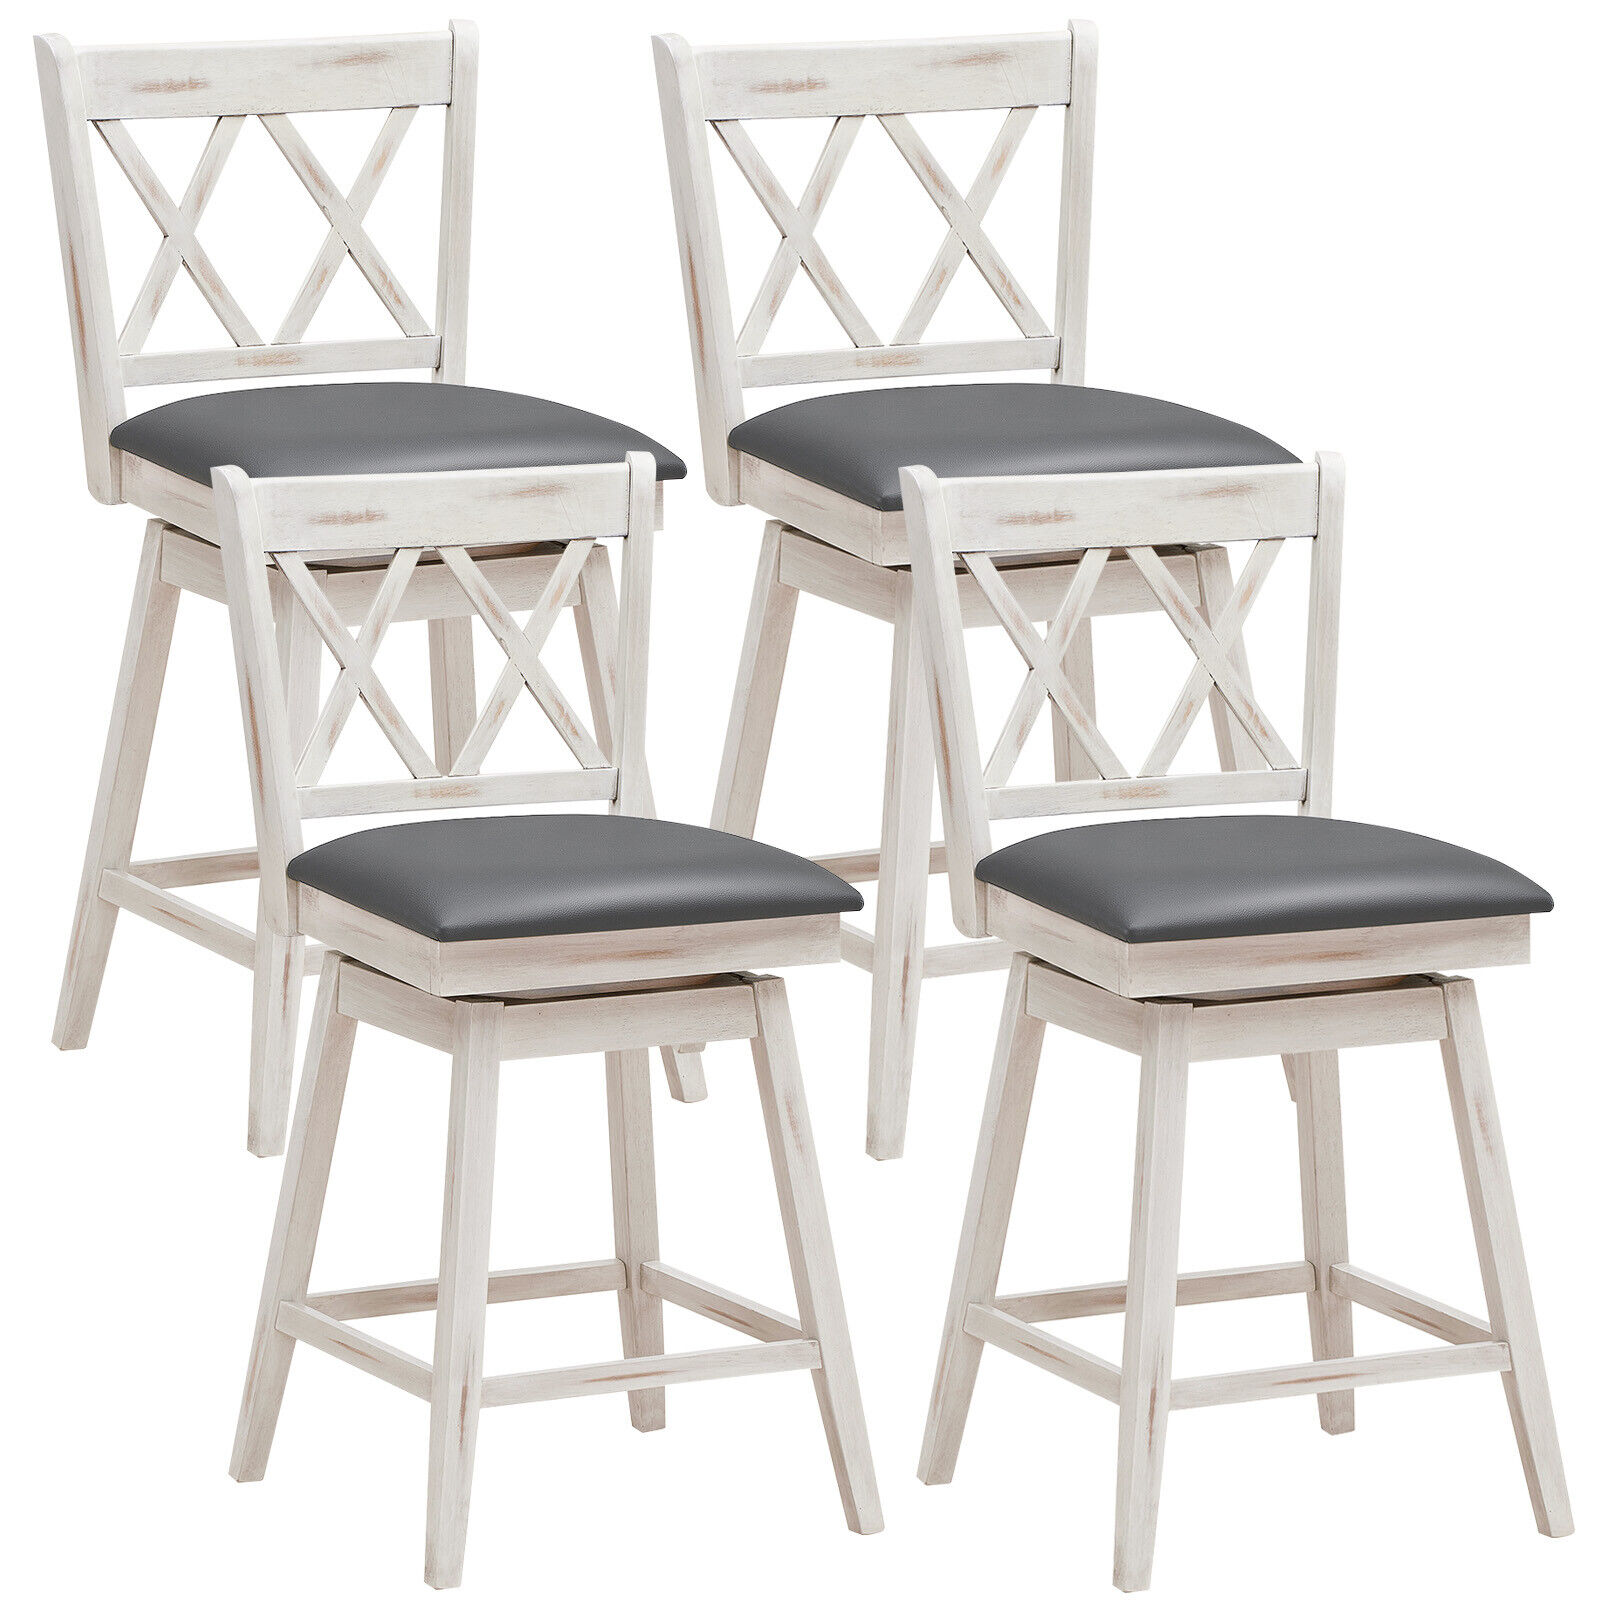 Costway Set of 4 Barstools Swivel Counter Height Chairs w/Rubber Wood Legs Antique White